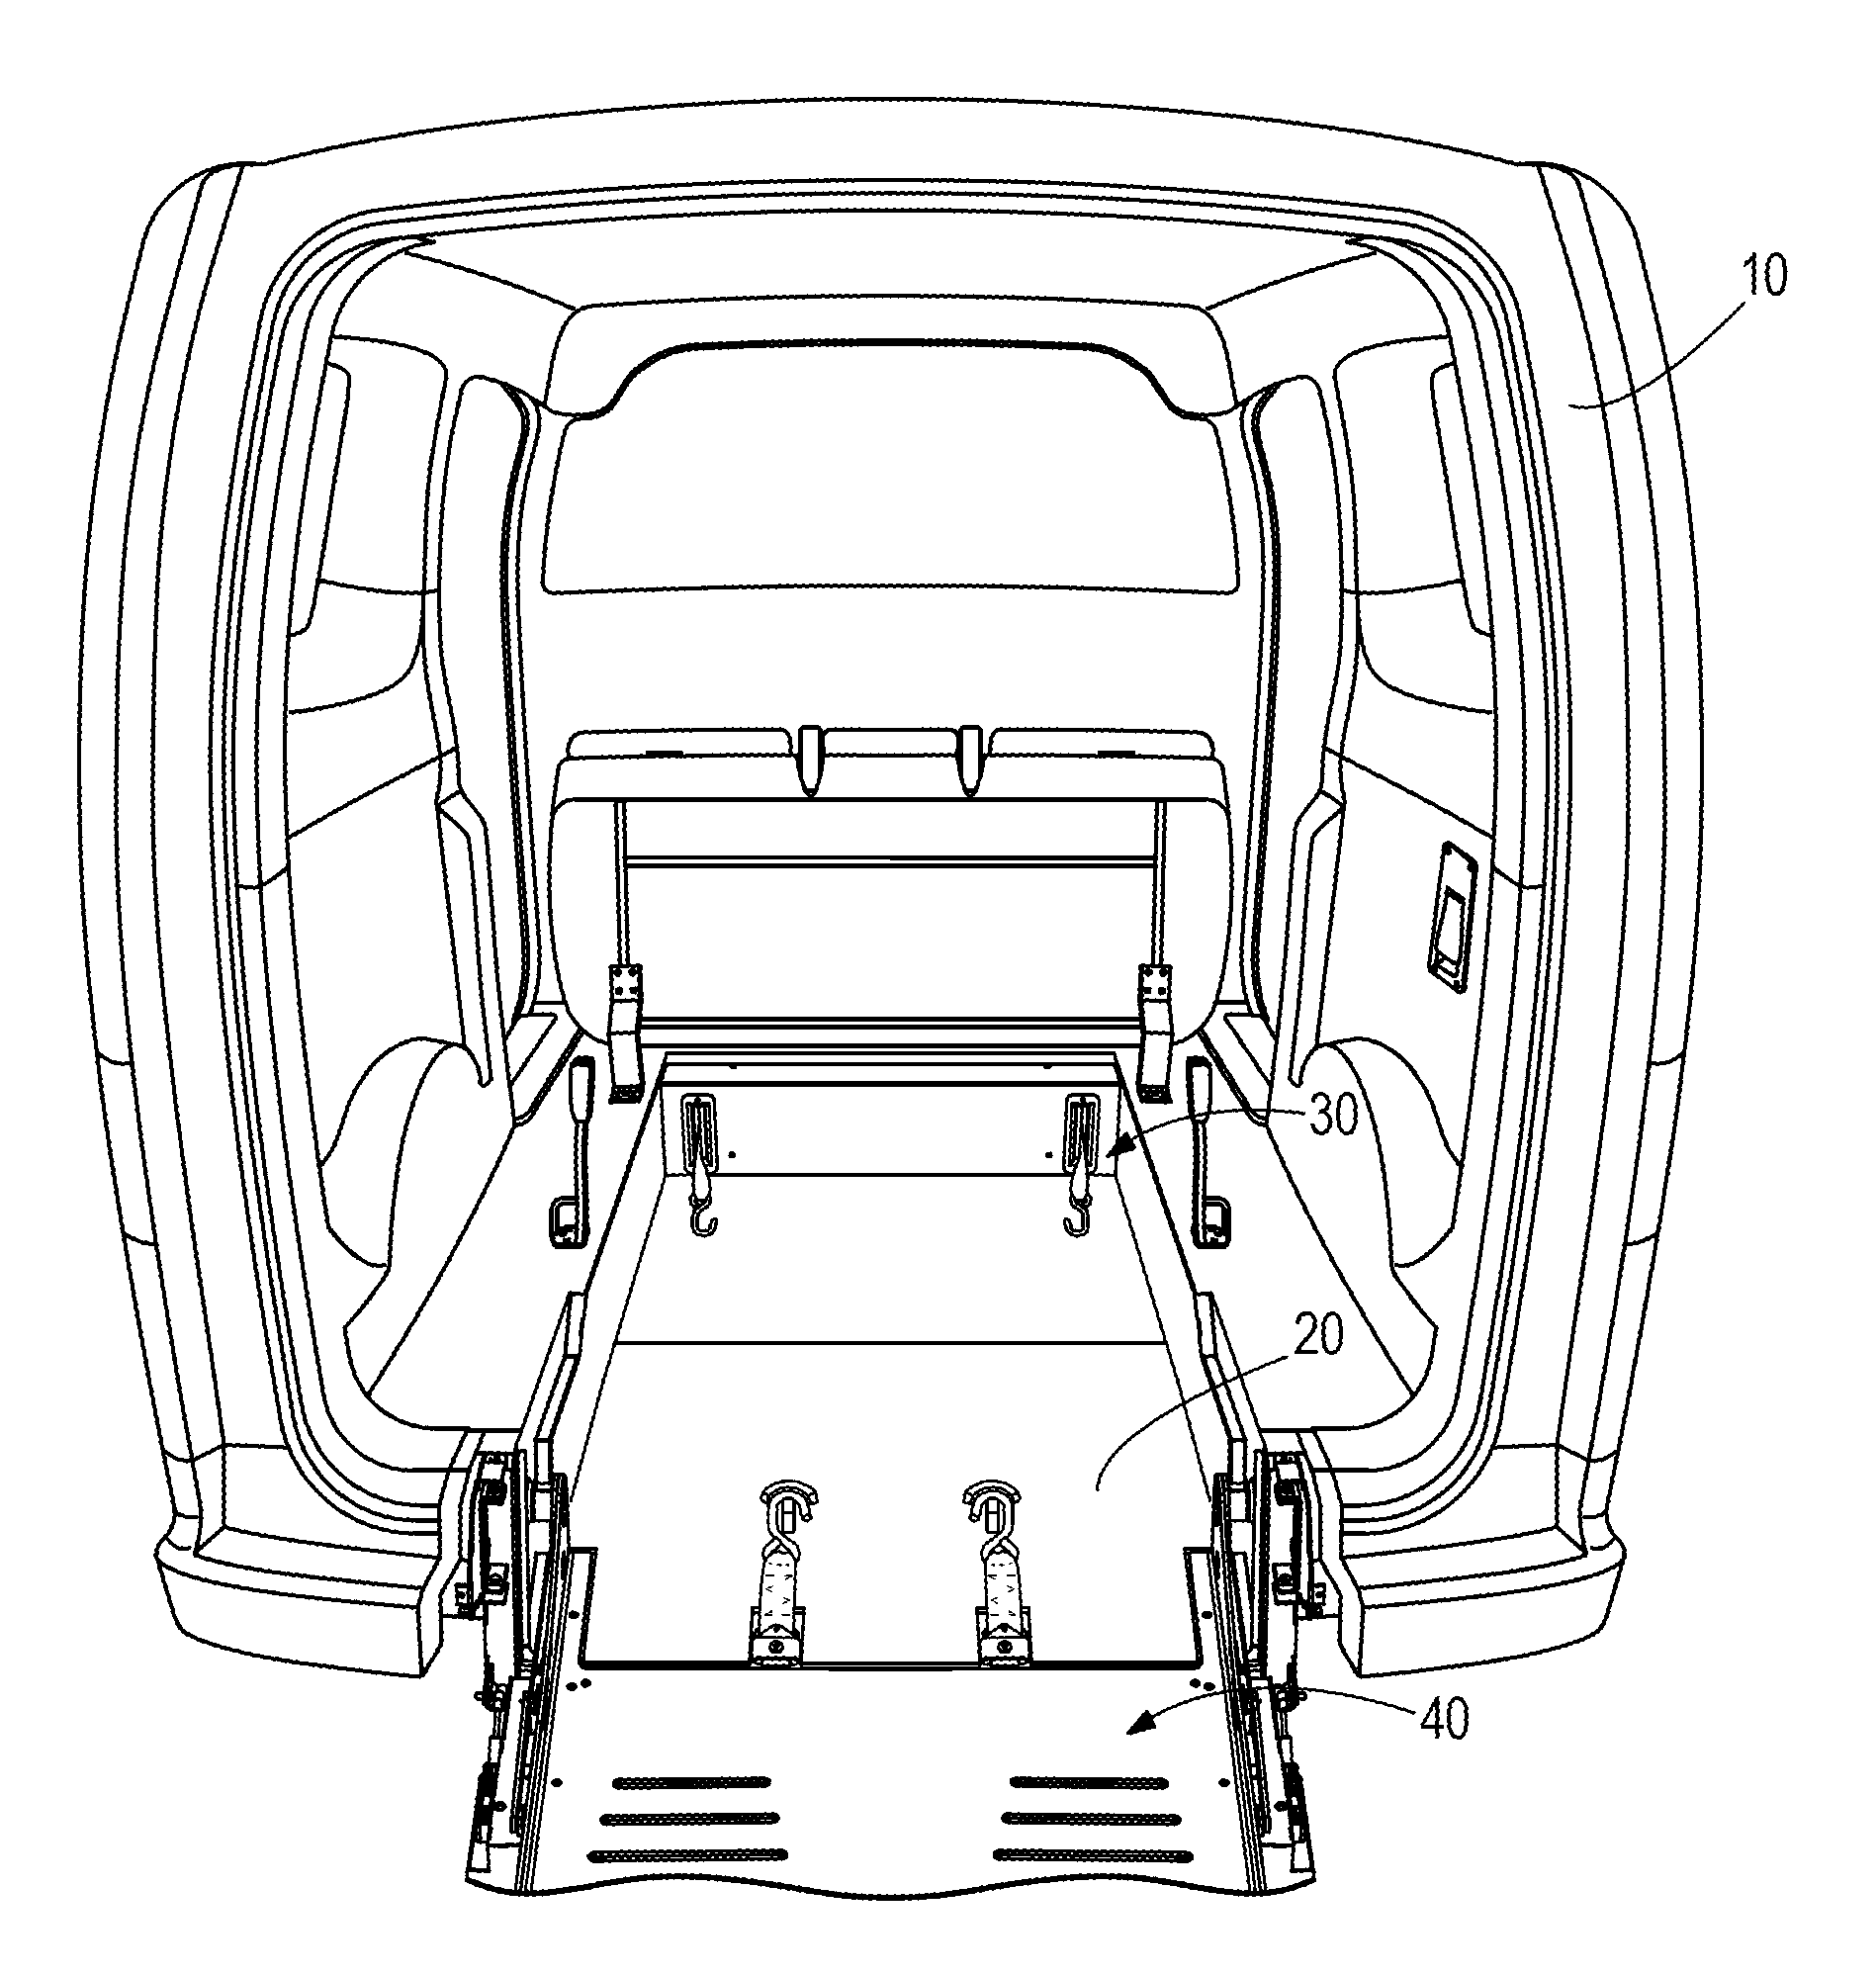 Vehicle accessibility system